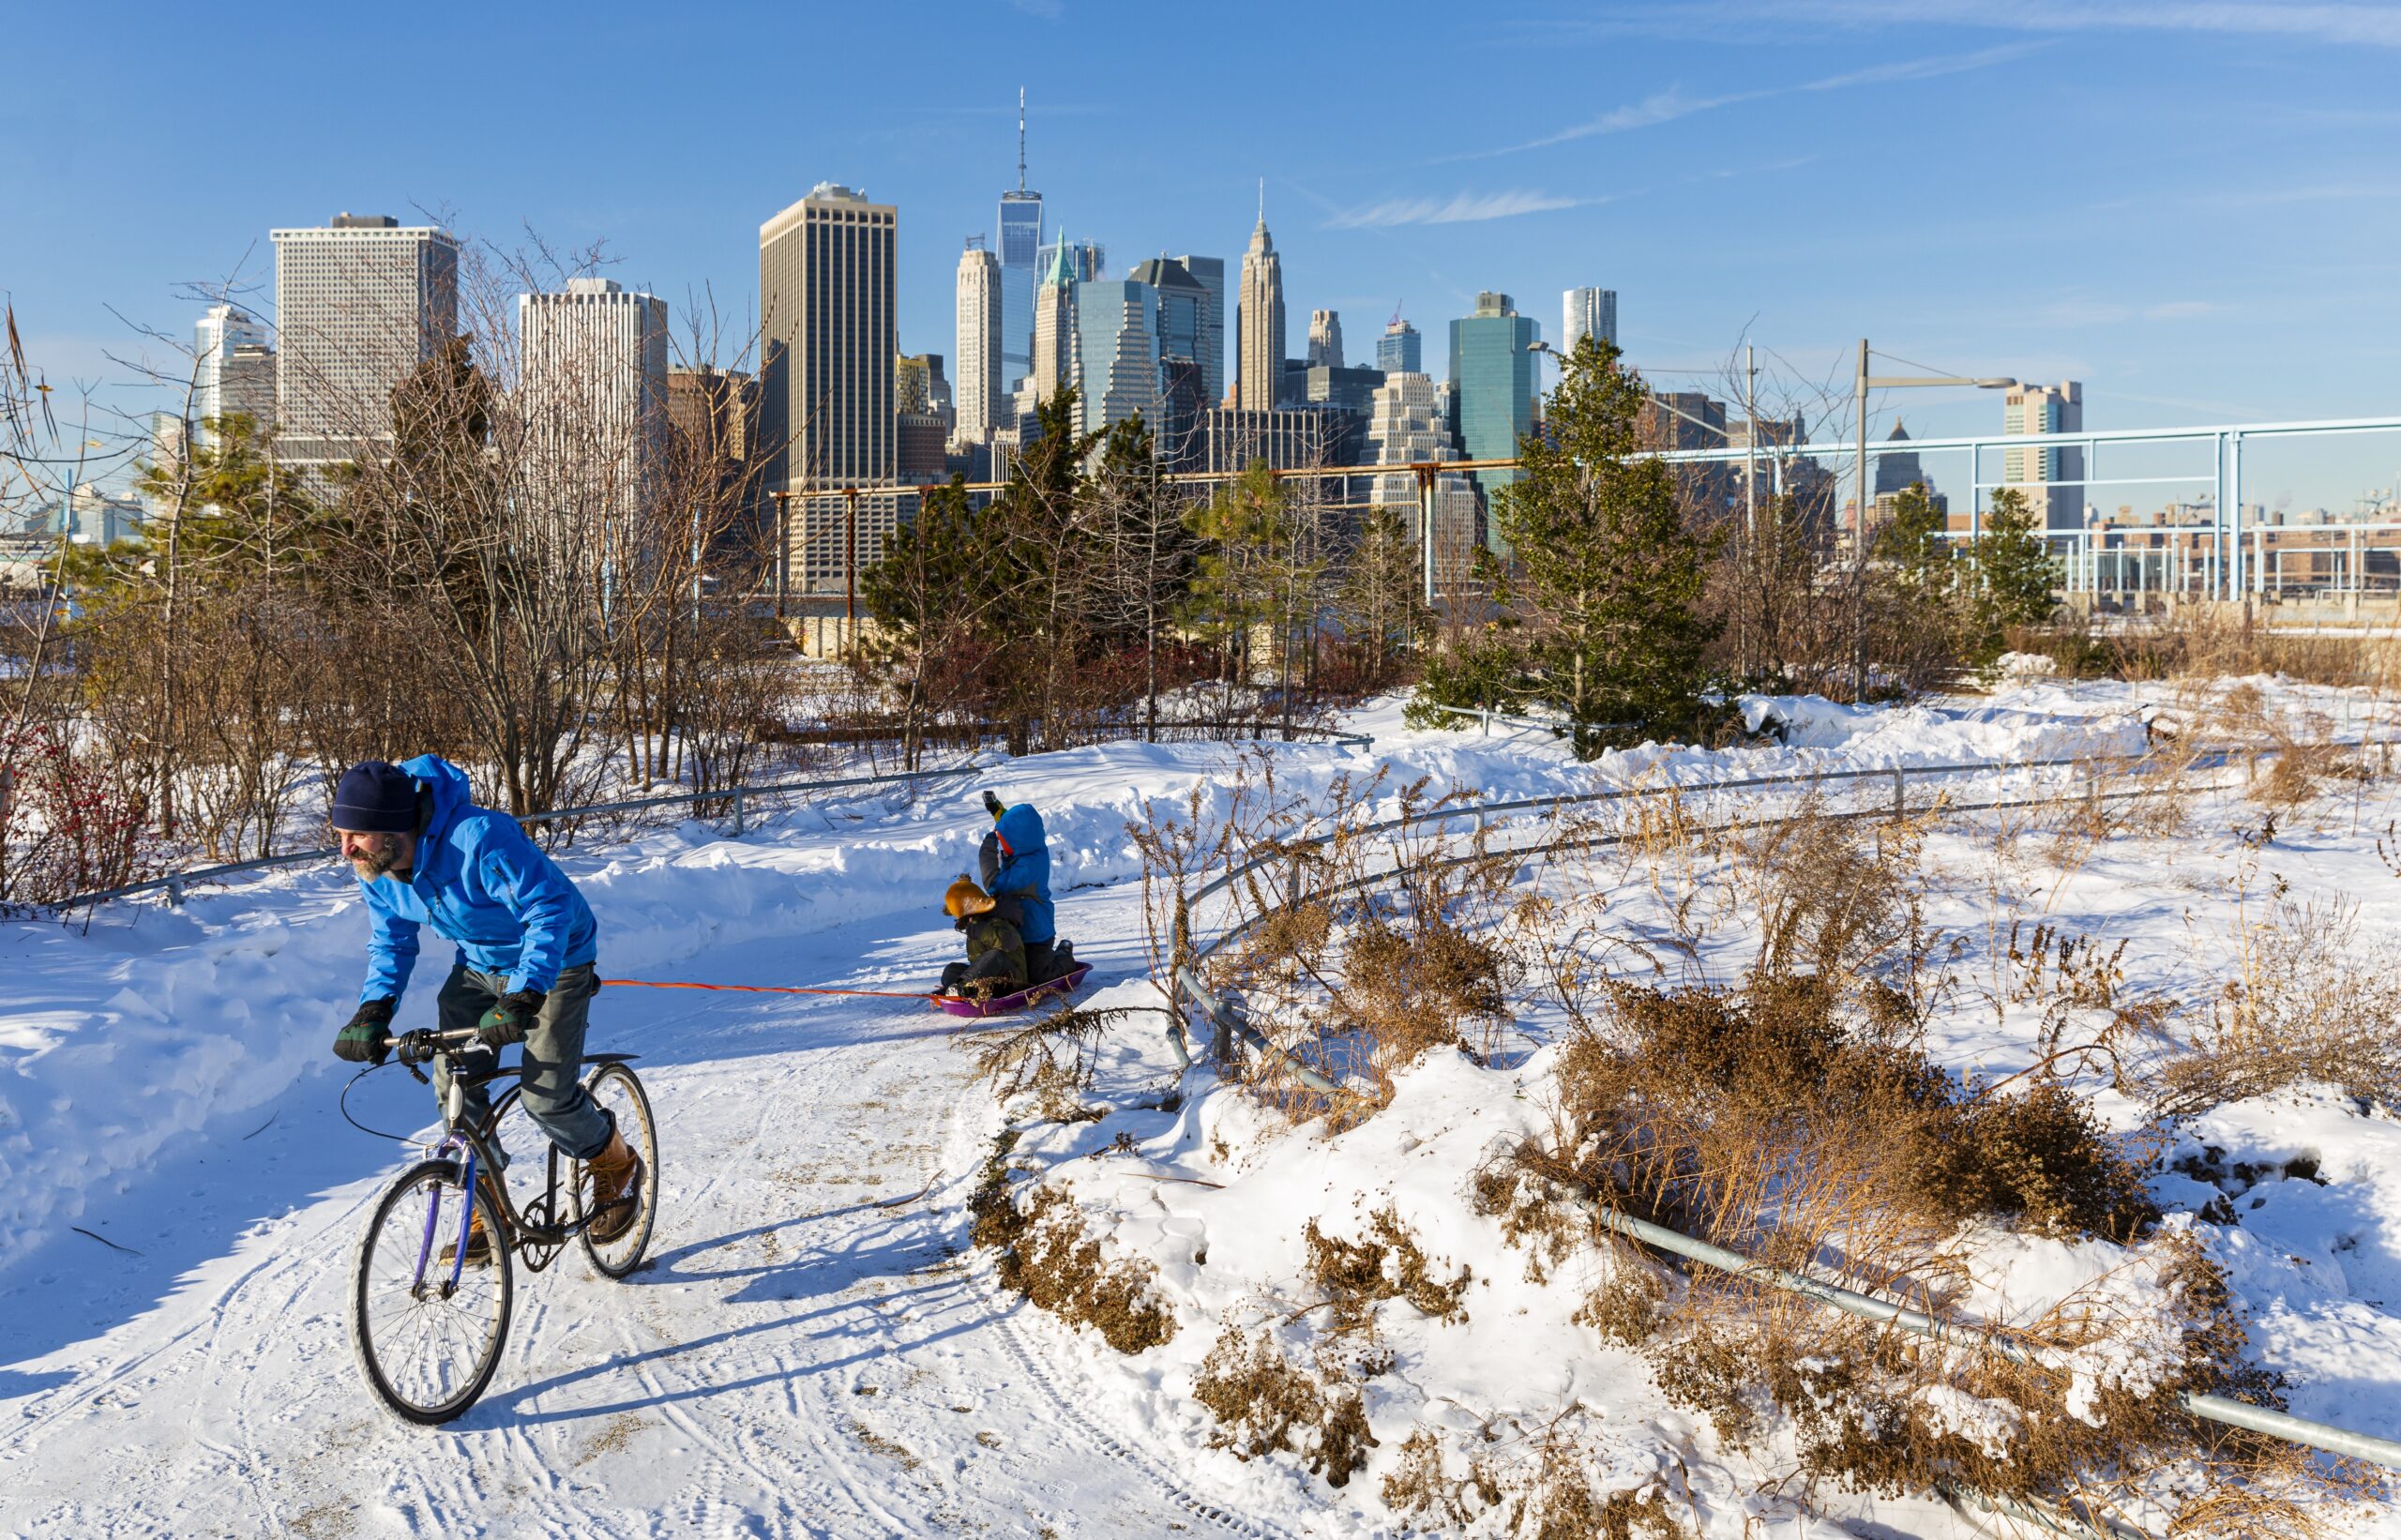 Cold and sunny winter day in Brooklyn Bridge Park. Photo: Etienne Frossard